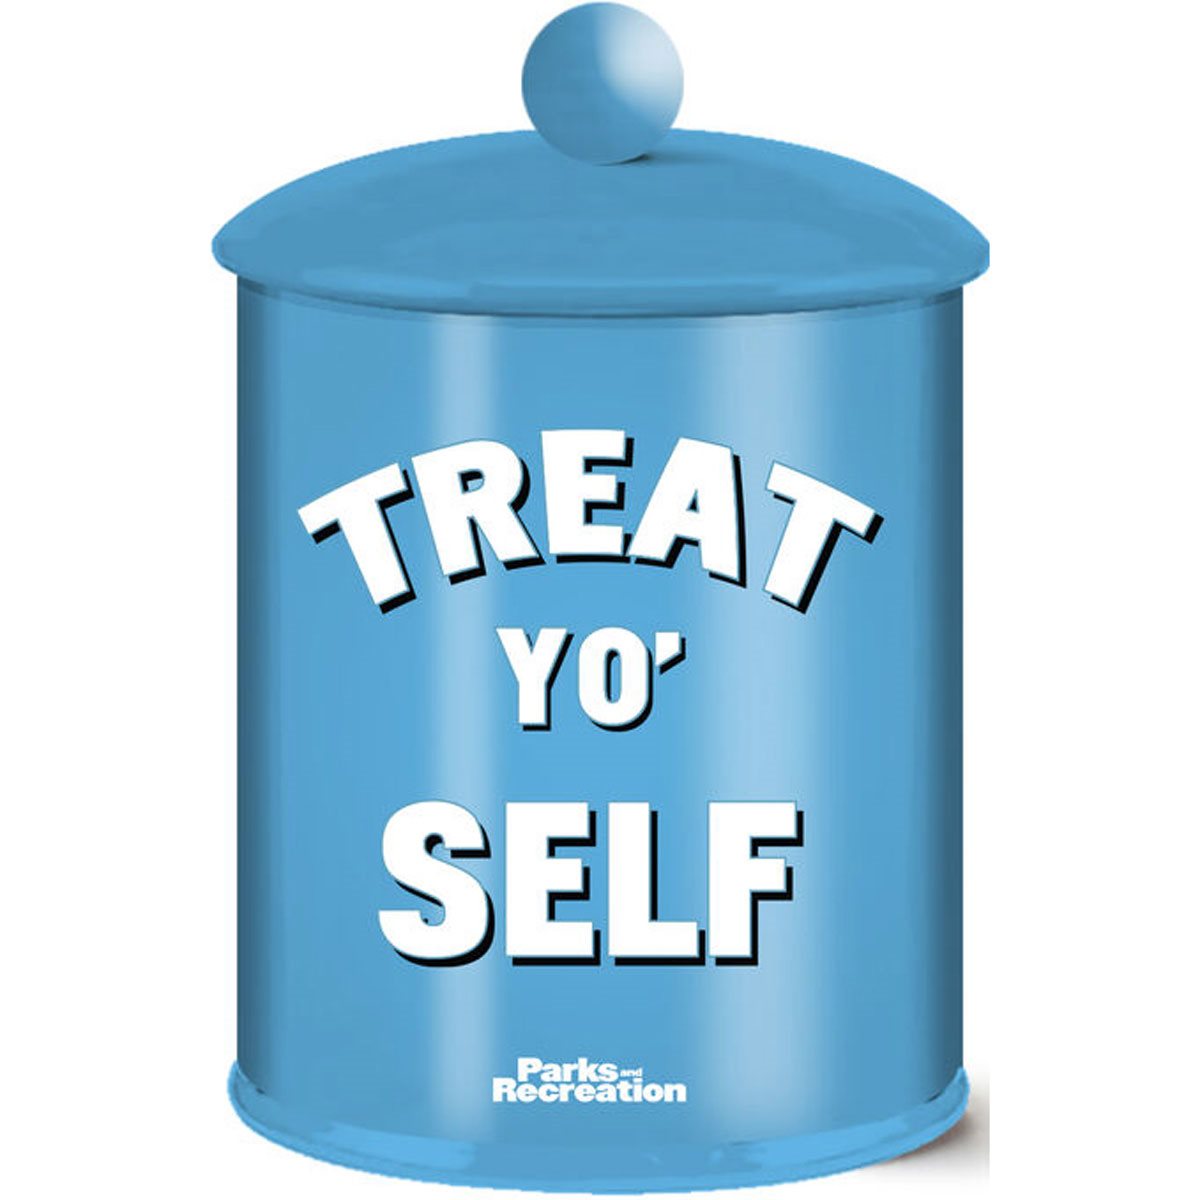 Cookie Jar Picture for Classroom / Therapy Use - Great Cookie Jar Clipart